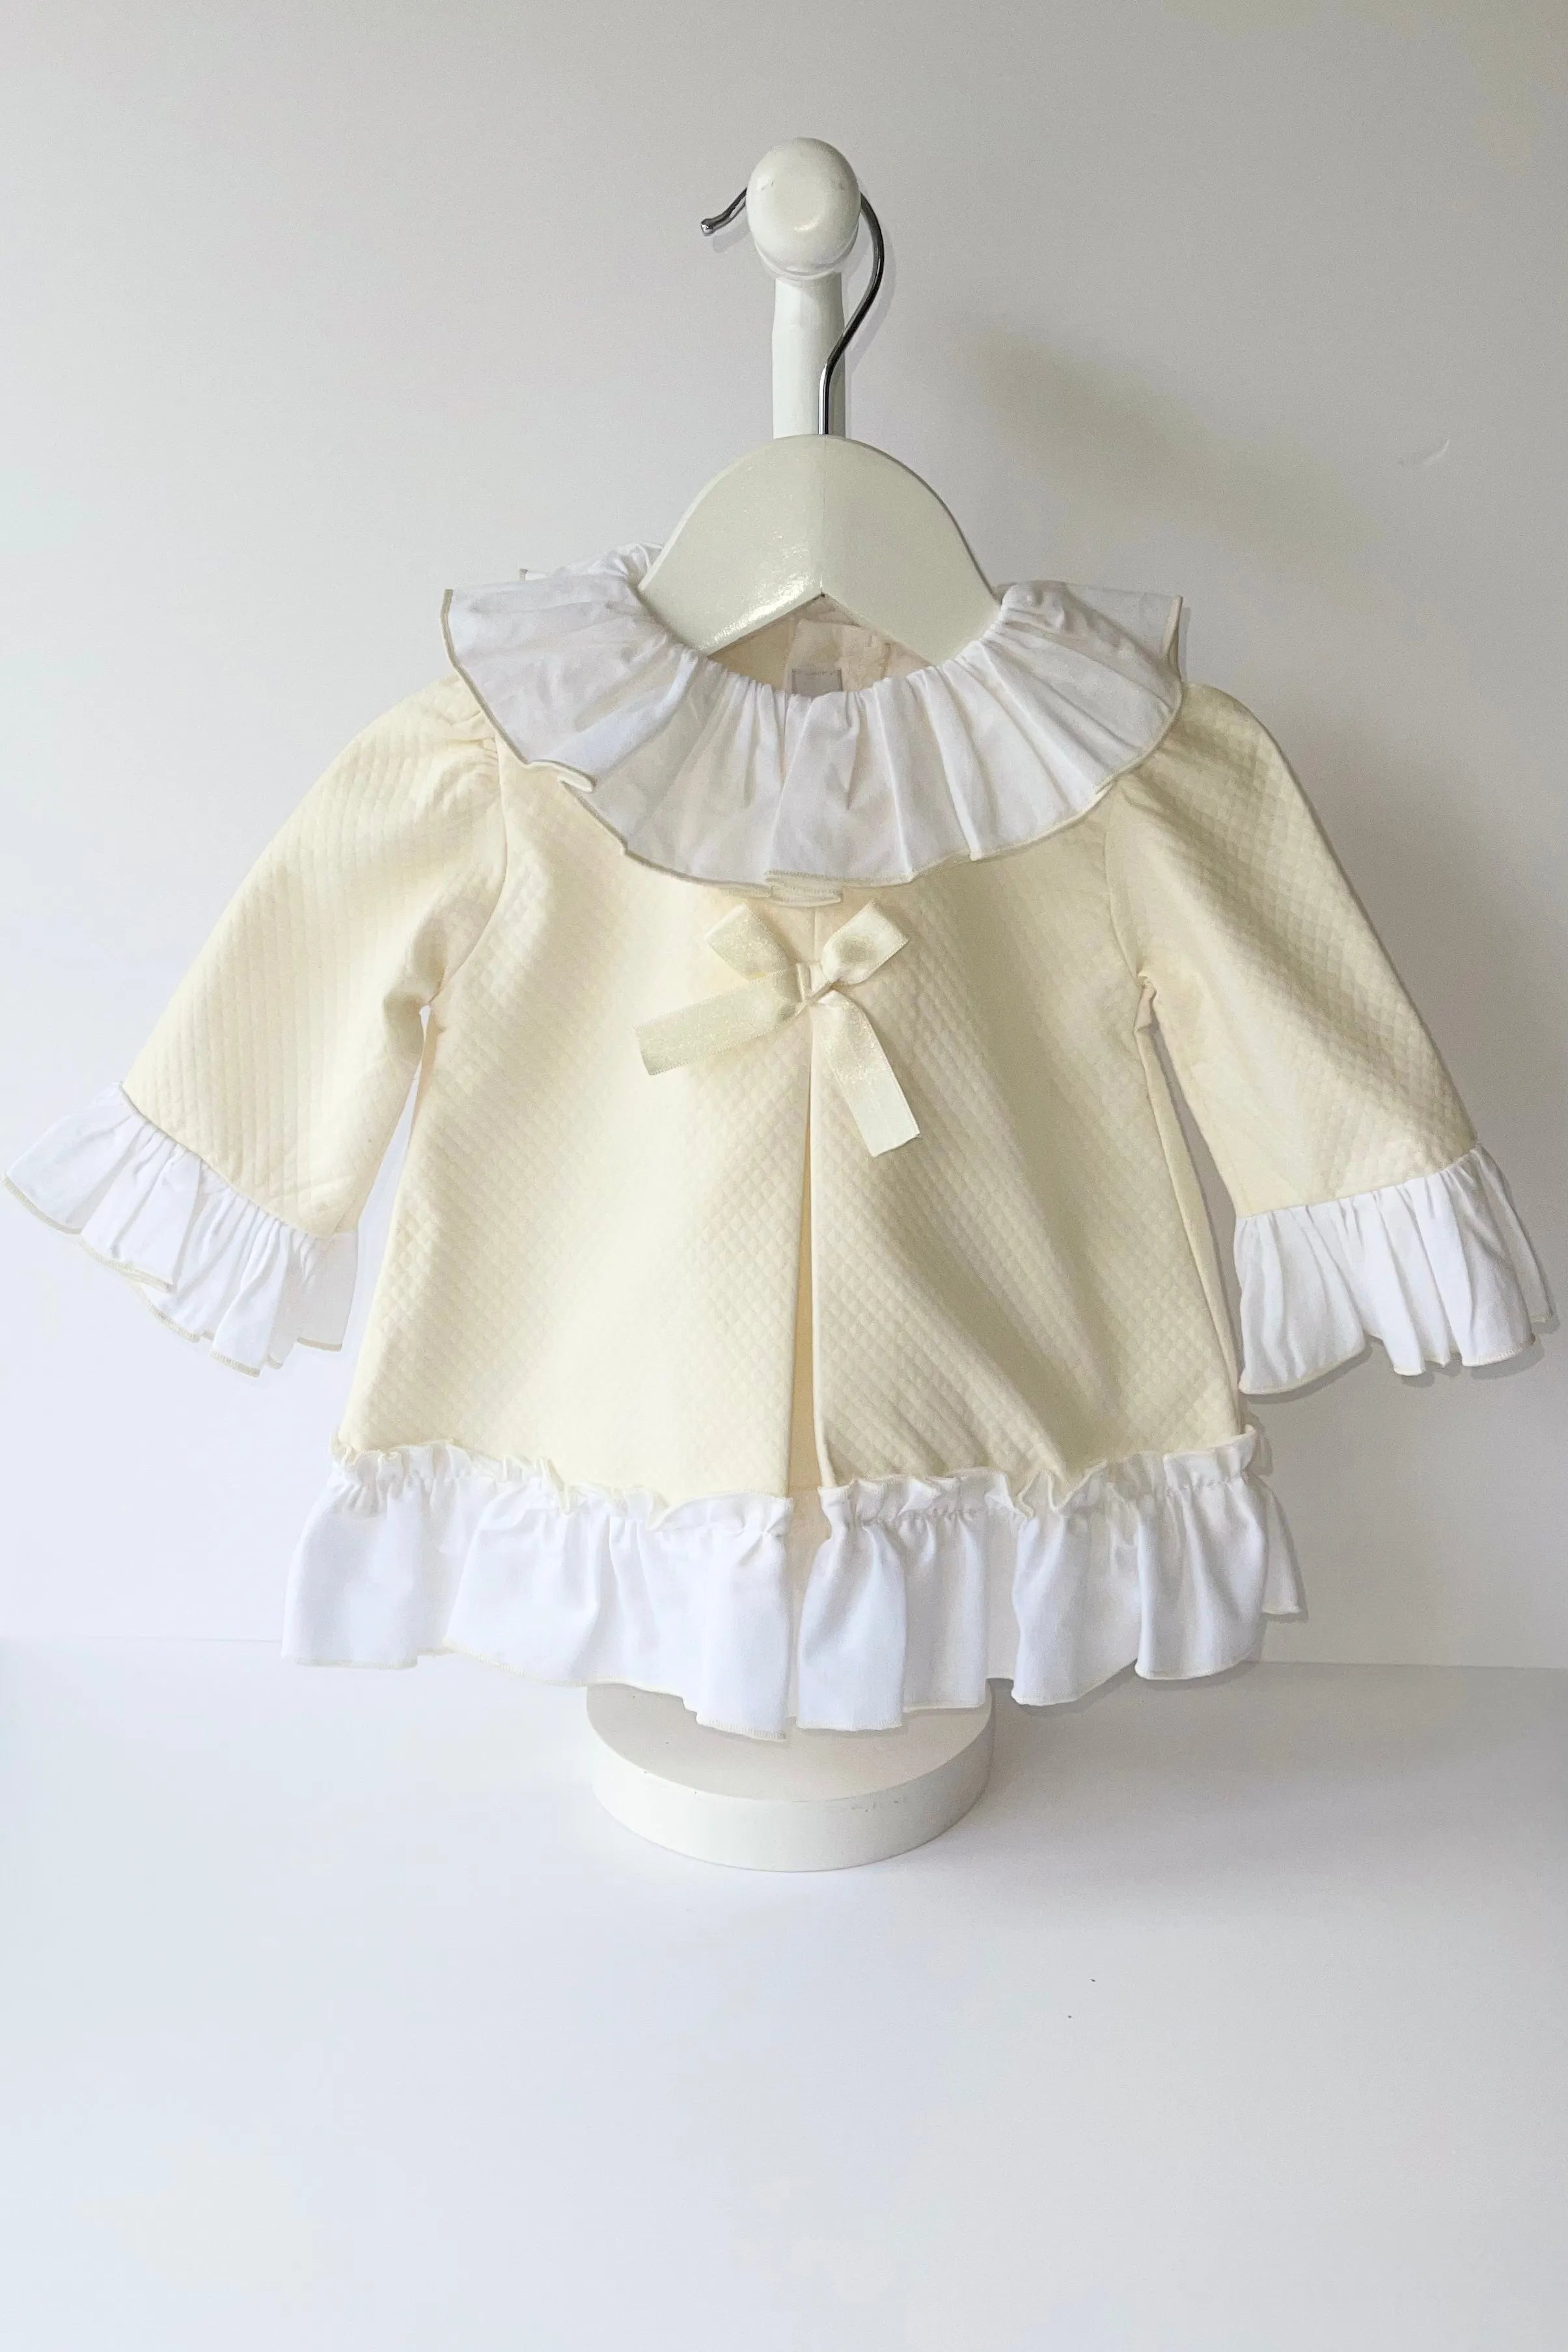 AW22 Lor Miral Cream Bow Pique Dress 420 - dainty delilah spanish childrens clothing